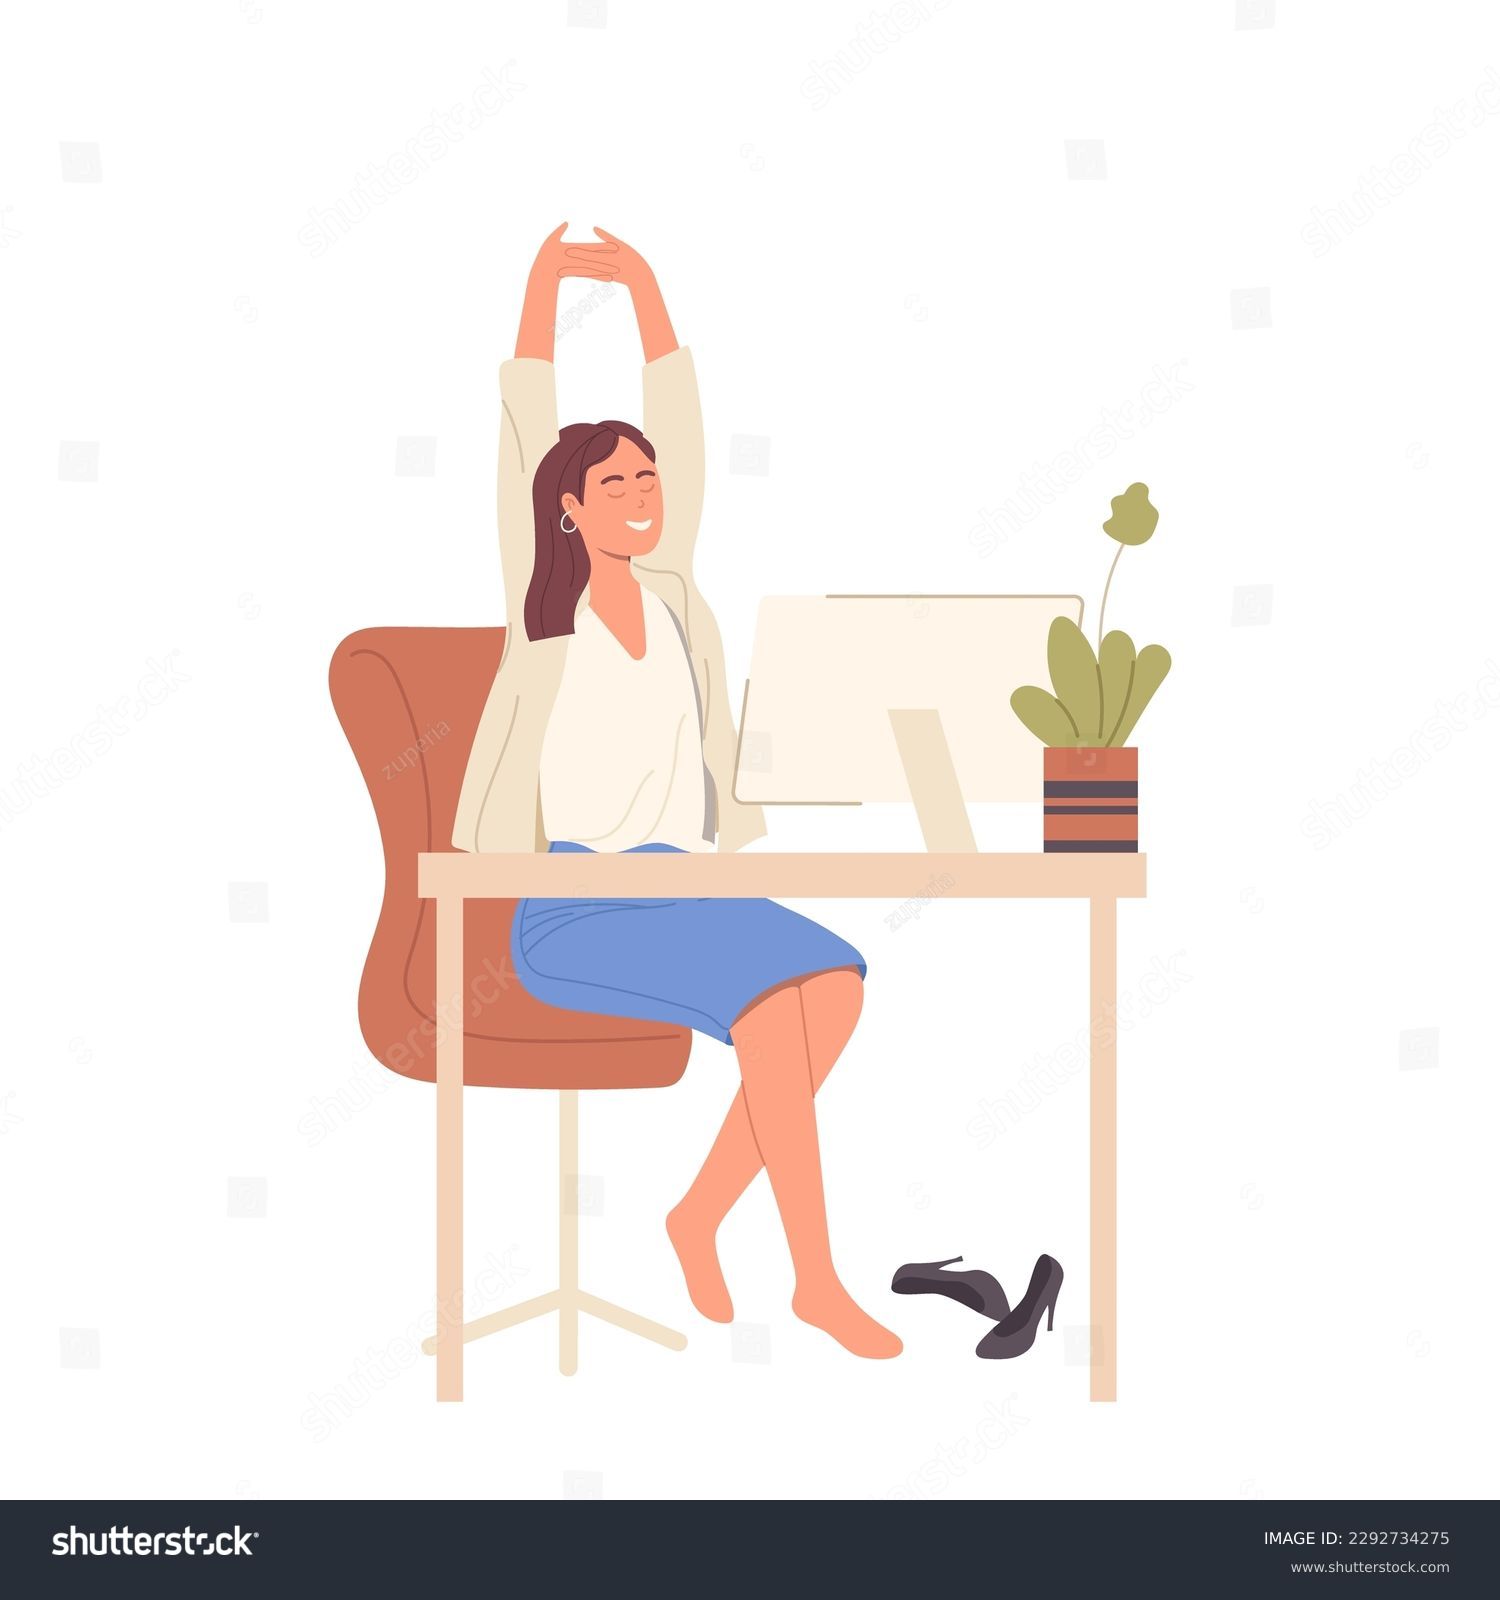 Smiling woman office worker character sitting at desk having rest and doing stretching exercise Arkistovektorikuva